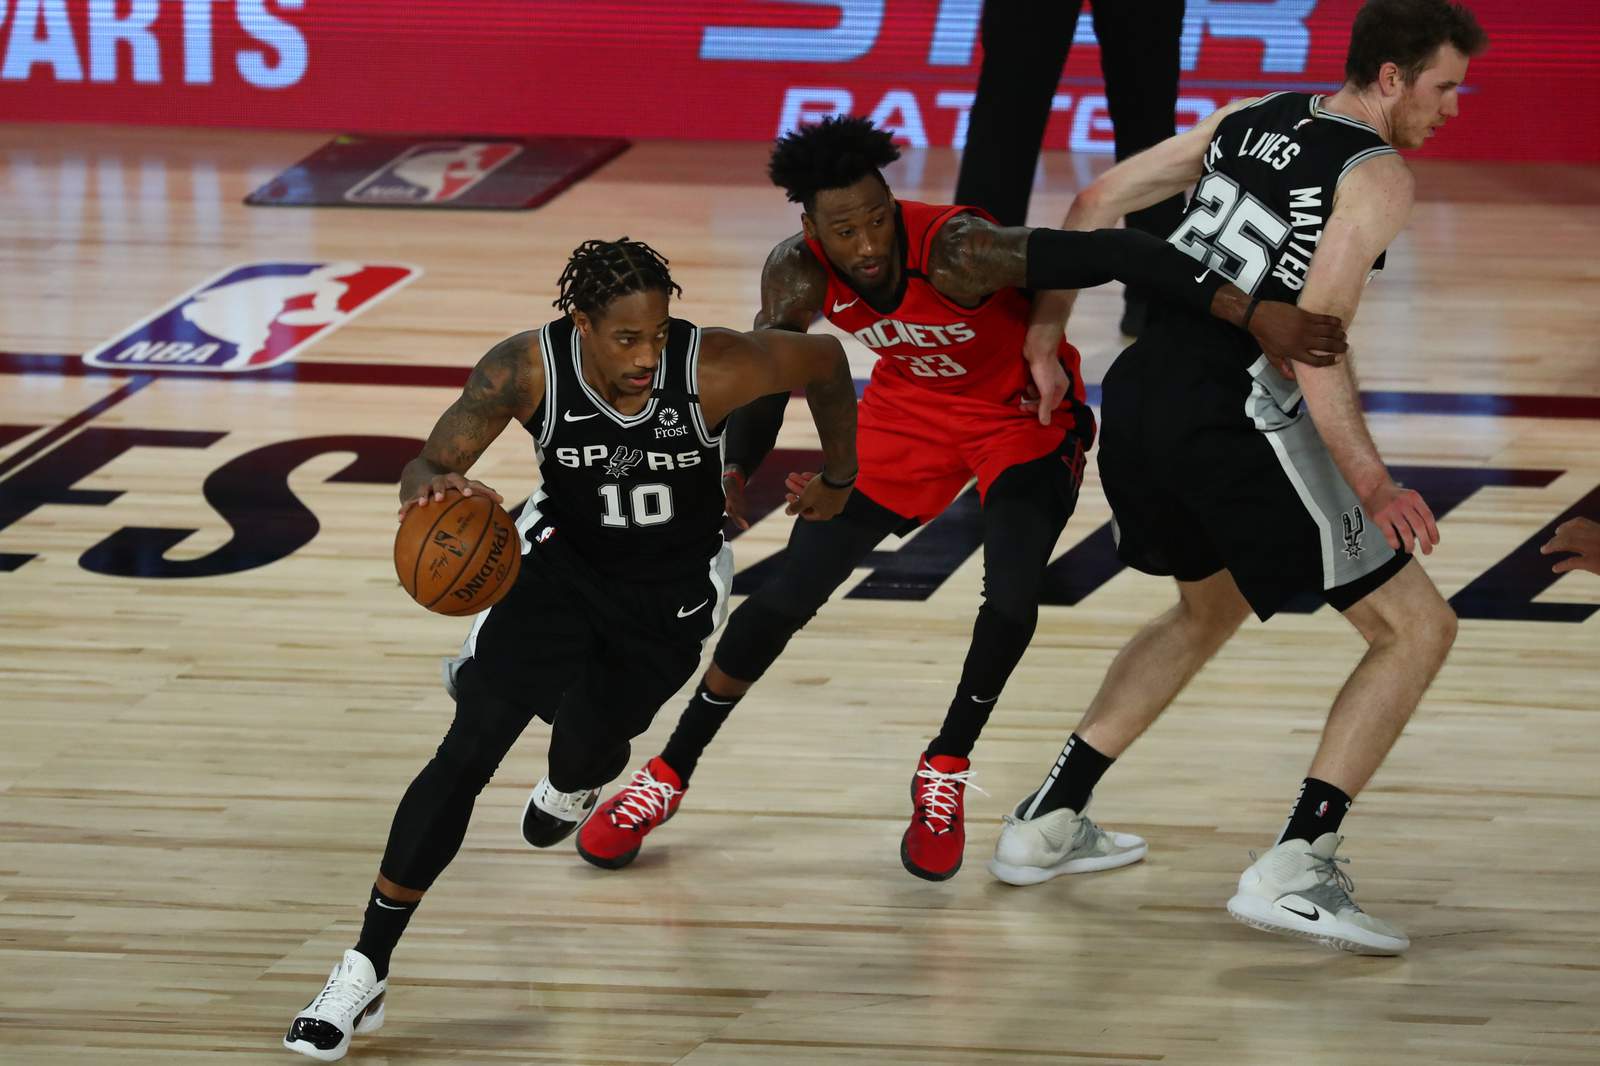 Spurs beat Rockets to keep playoff hopes alive, need help from other teams